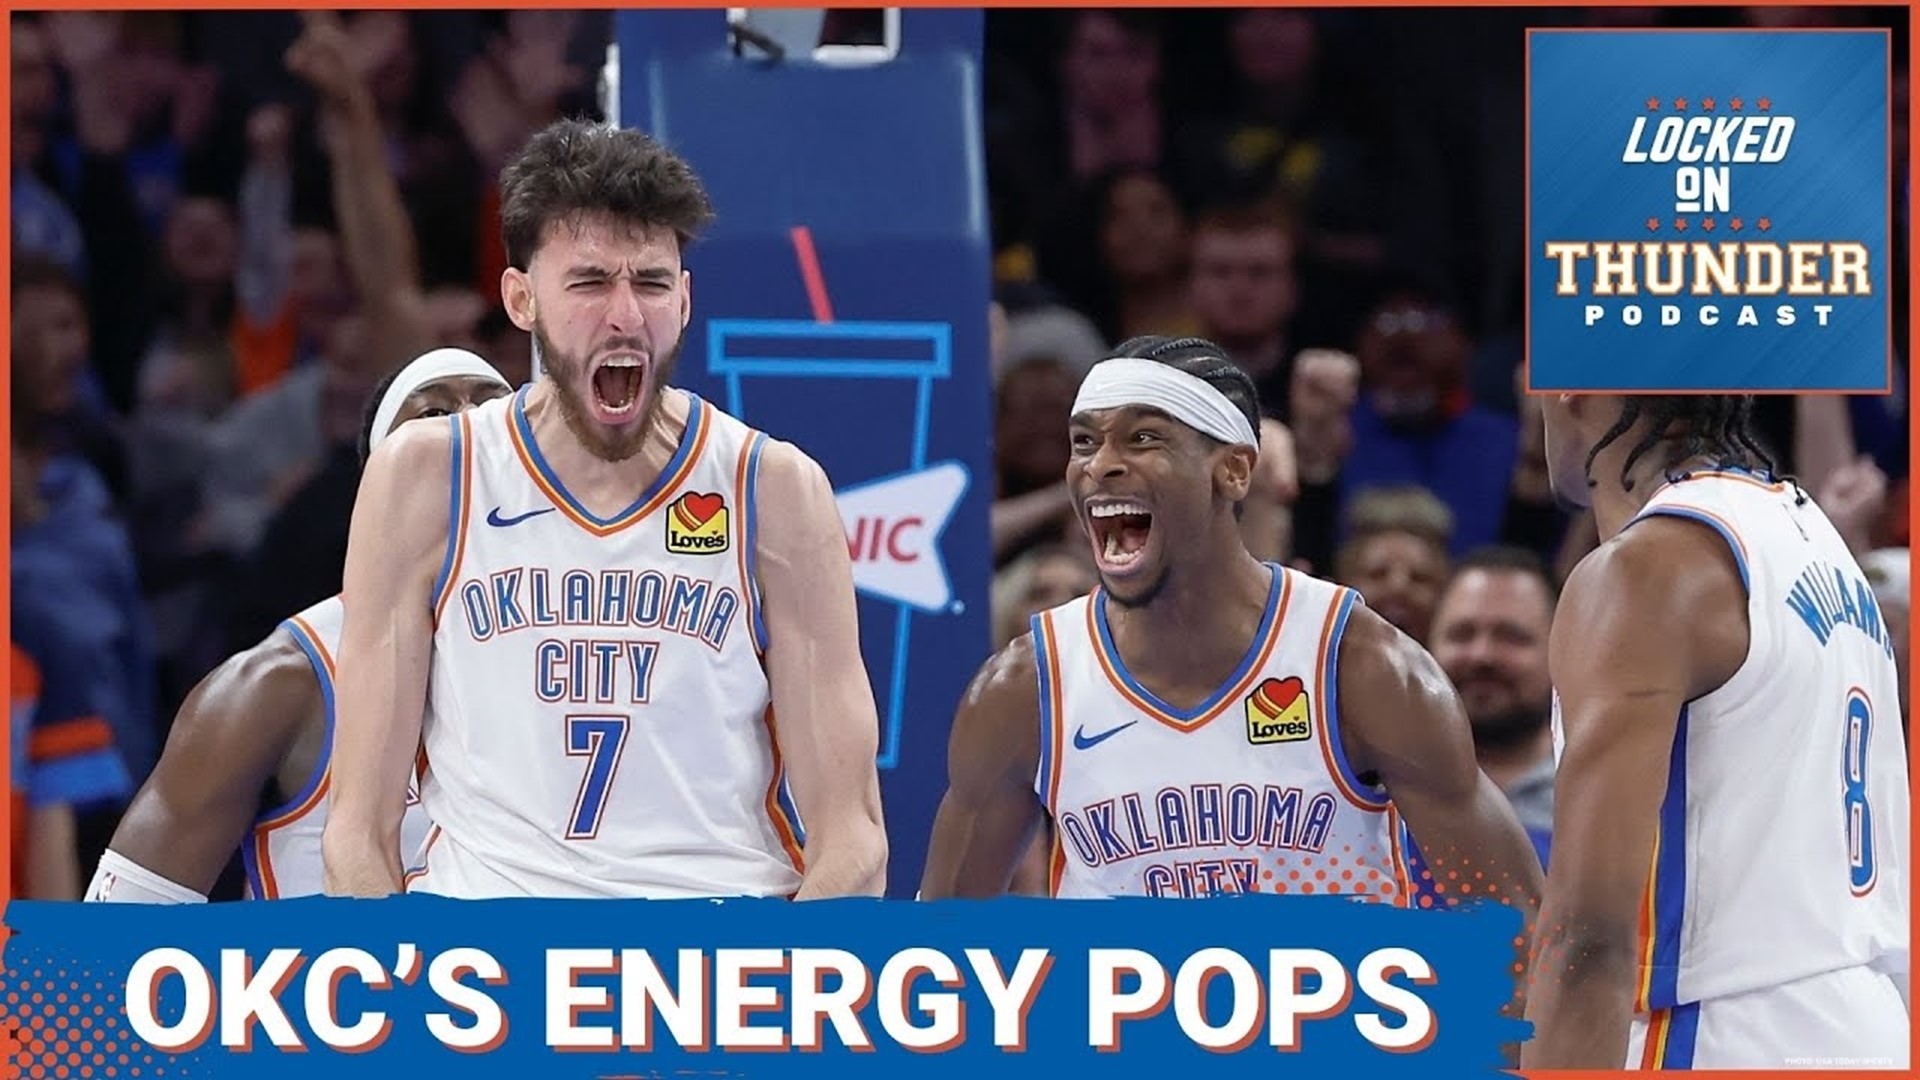 The Oklahoma City Thunder saw fantastic energy in their first practice back since clinching the No. 1 seed in the first round of the Western Conference Playoffs.